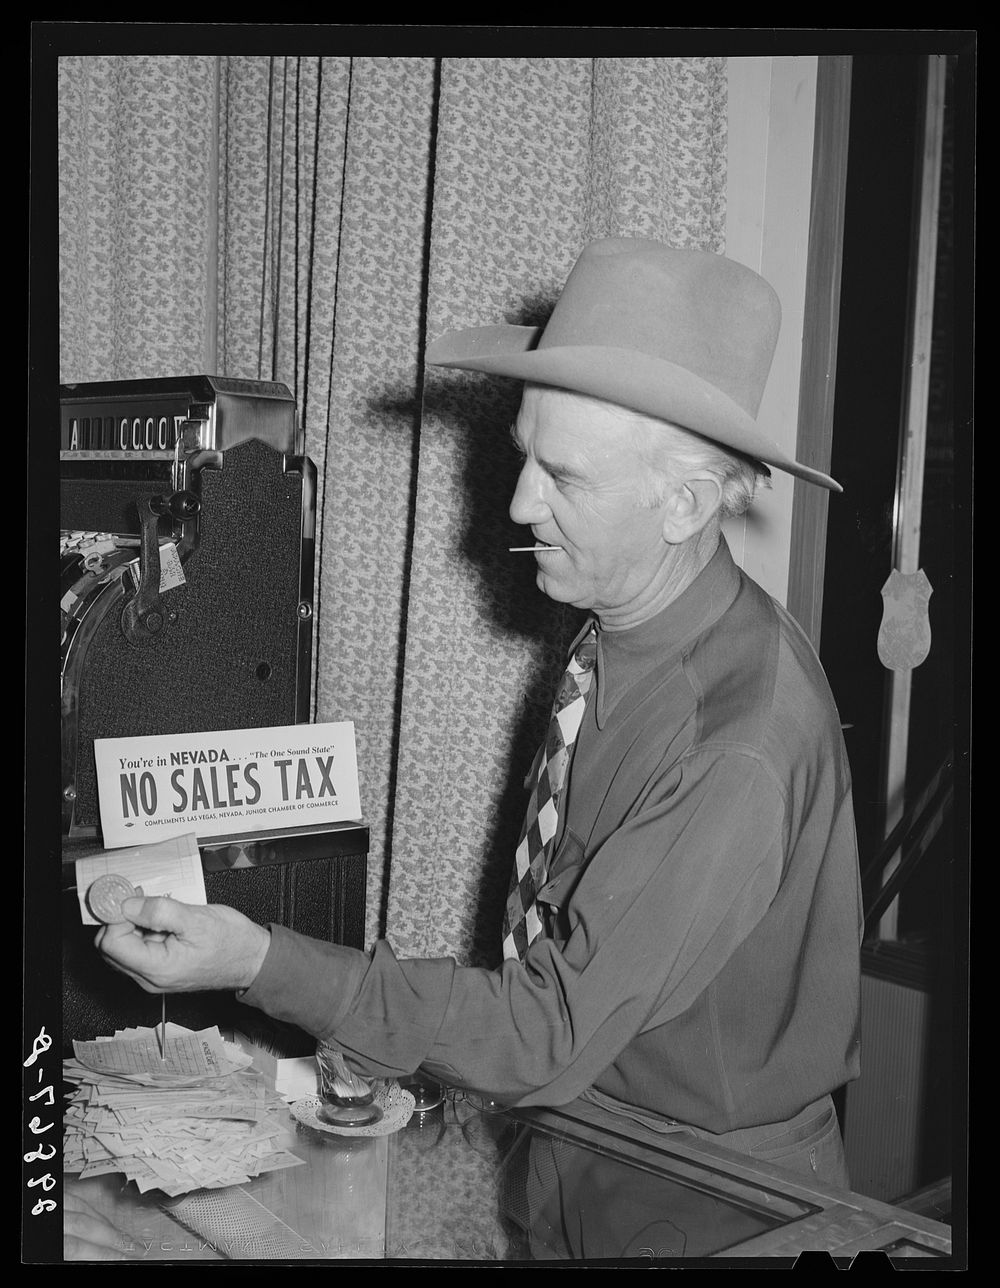 Paying the check in restaurant. Las Vegas, Nevada. Sourced from the Library of Congress.